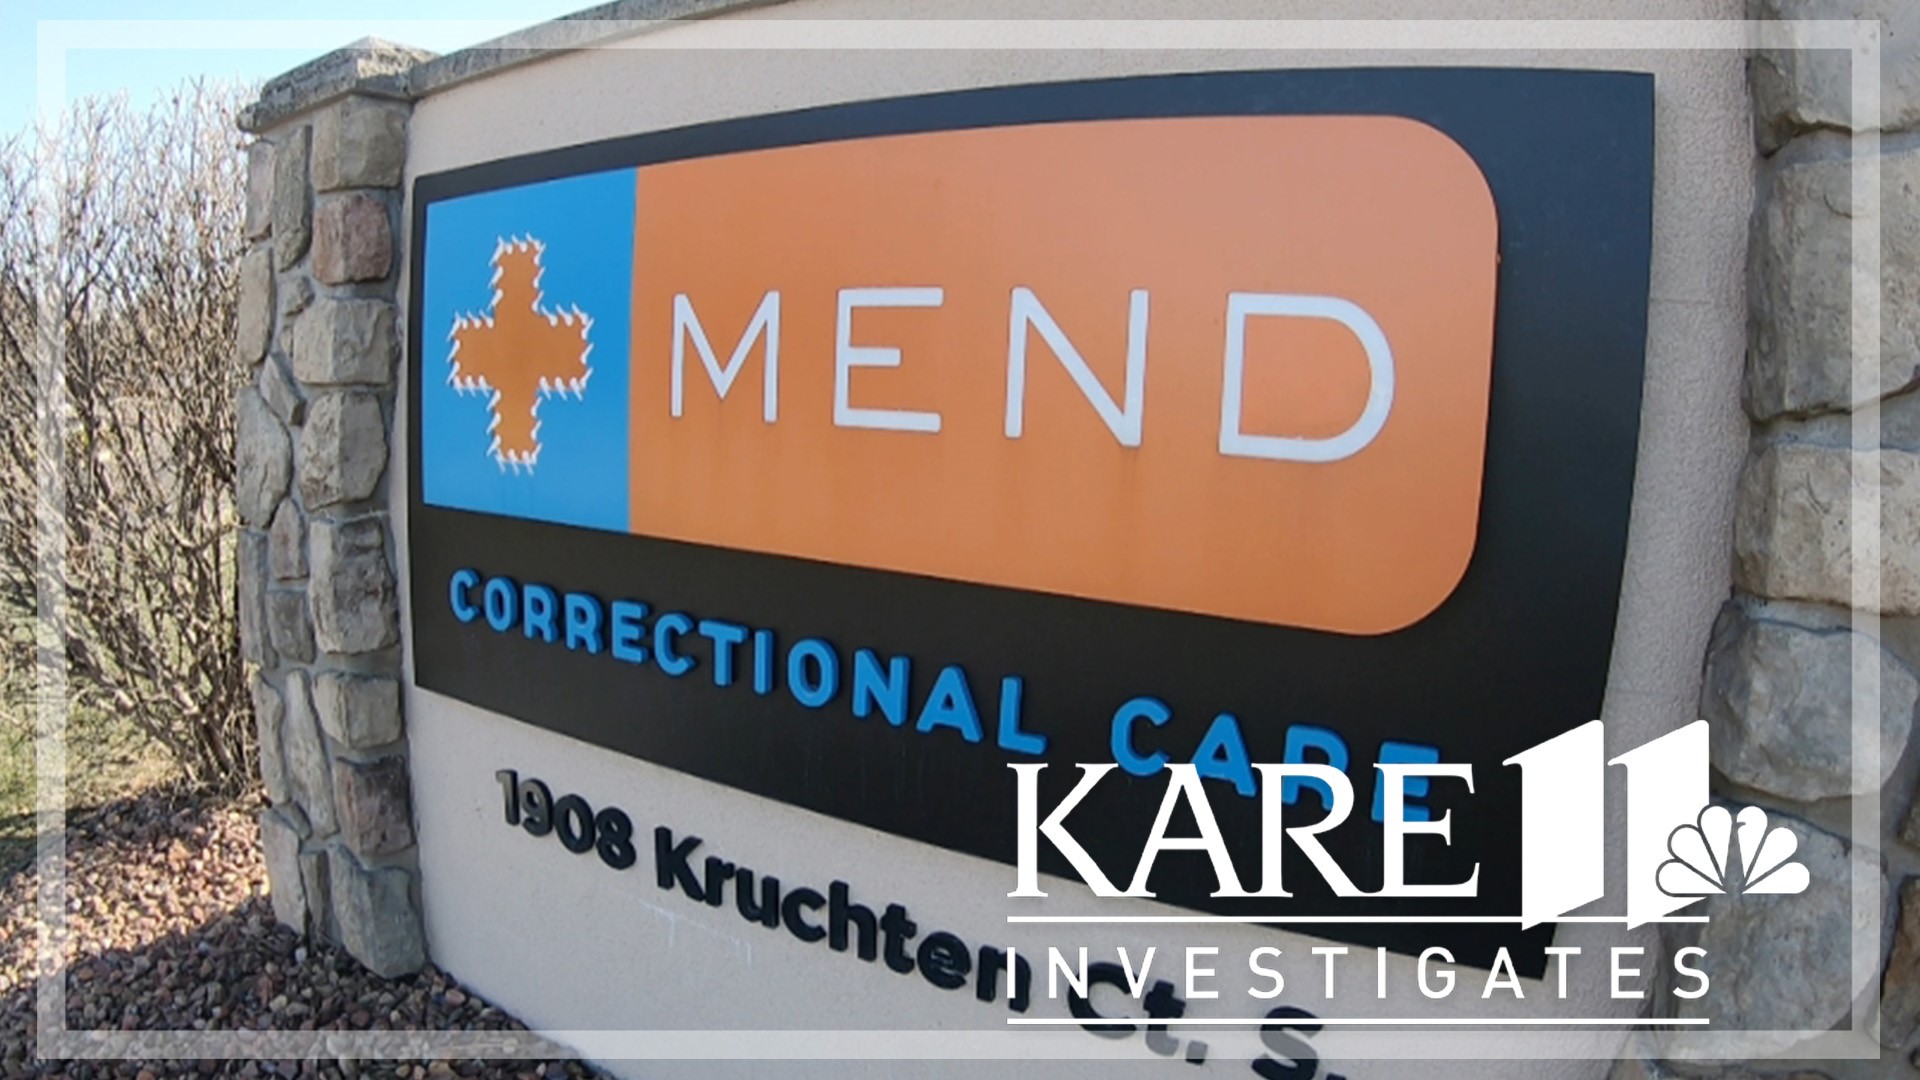 The company at the center of KARE 11’s investigations into numerous inmate deaths, MEnD Correctional Care, says they can no longer pay their bills.